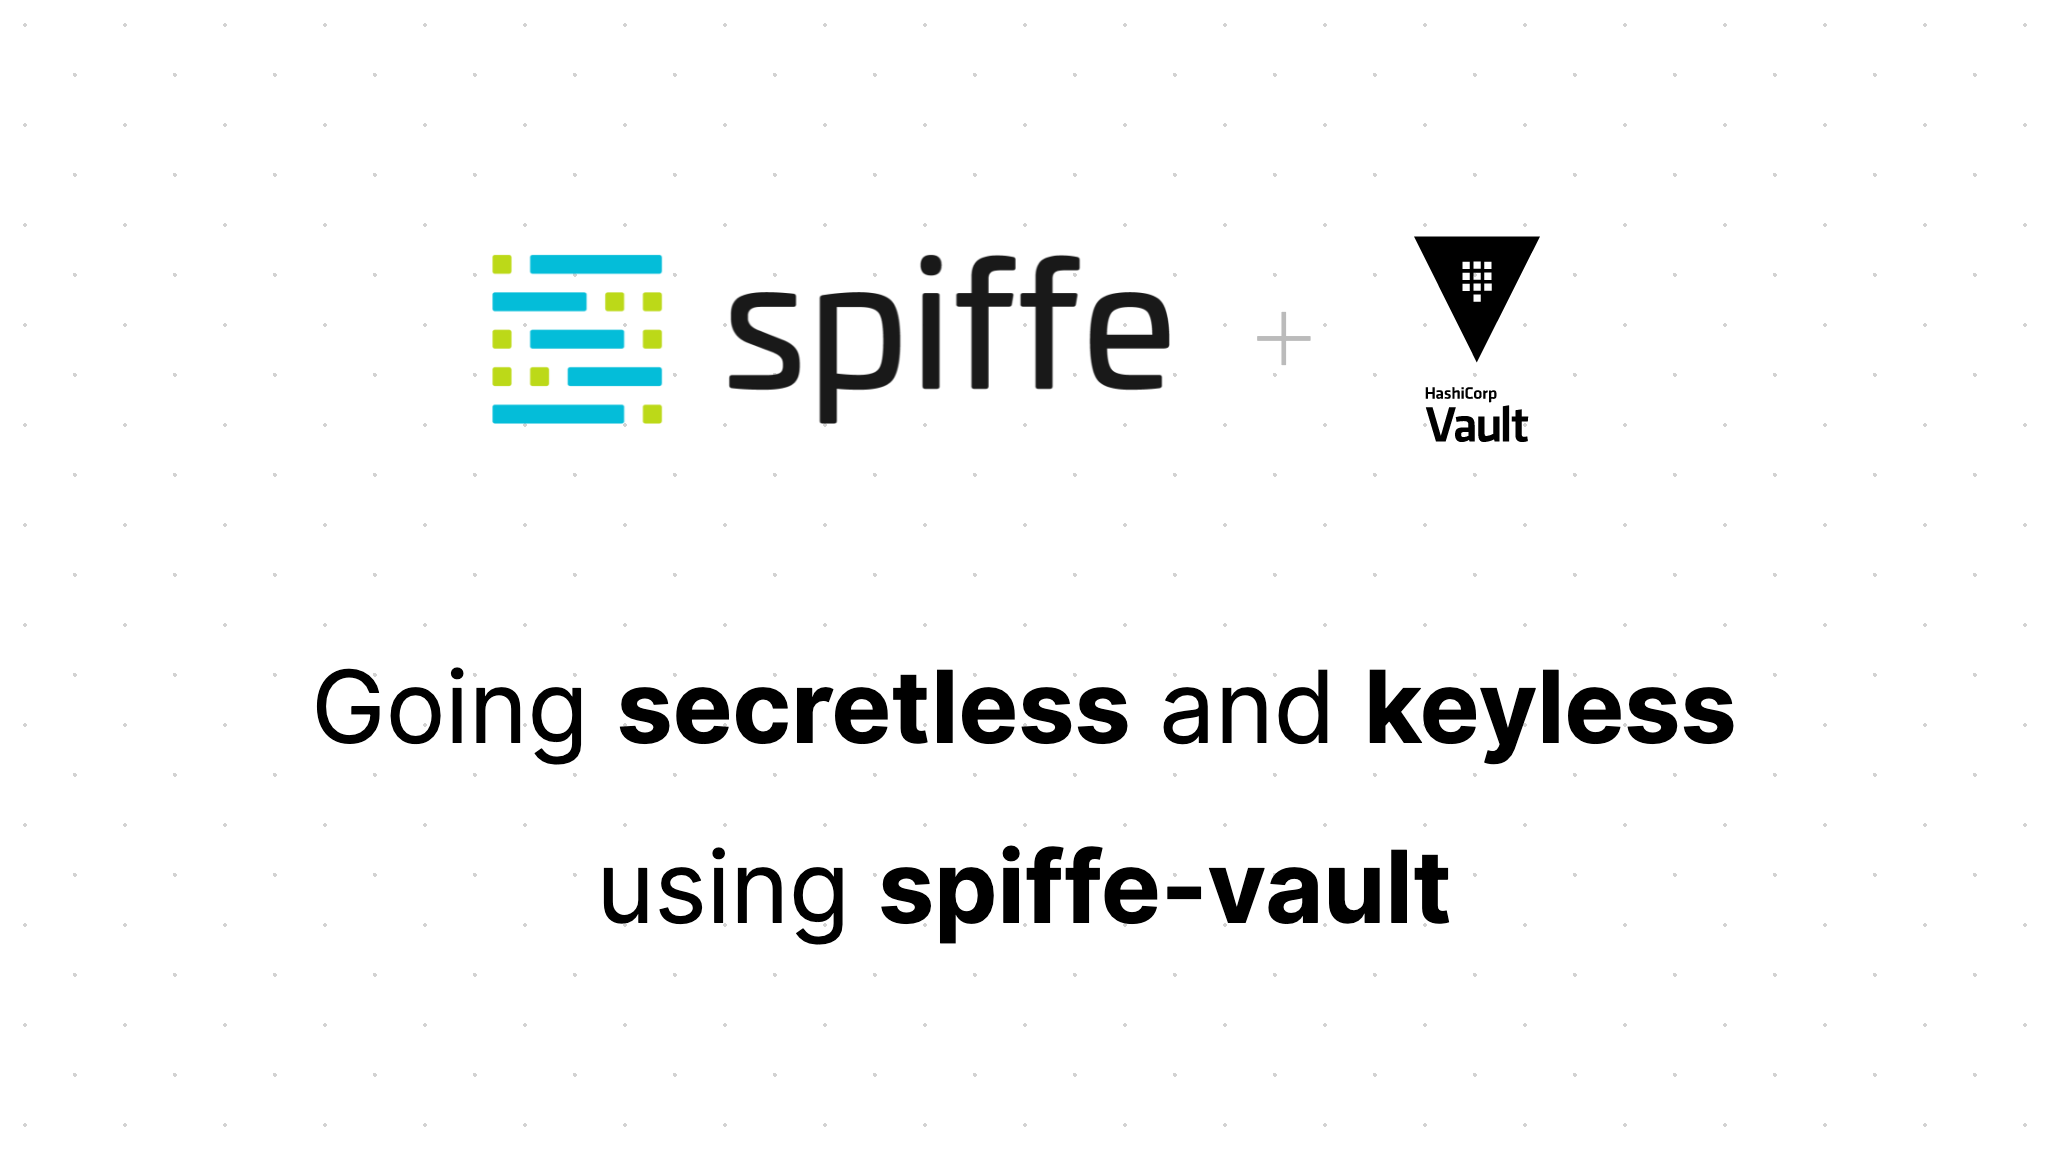 Cover Image for Going secretless and keyless with Spiffe Vault